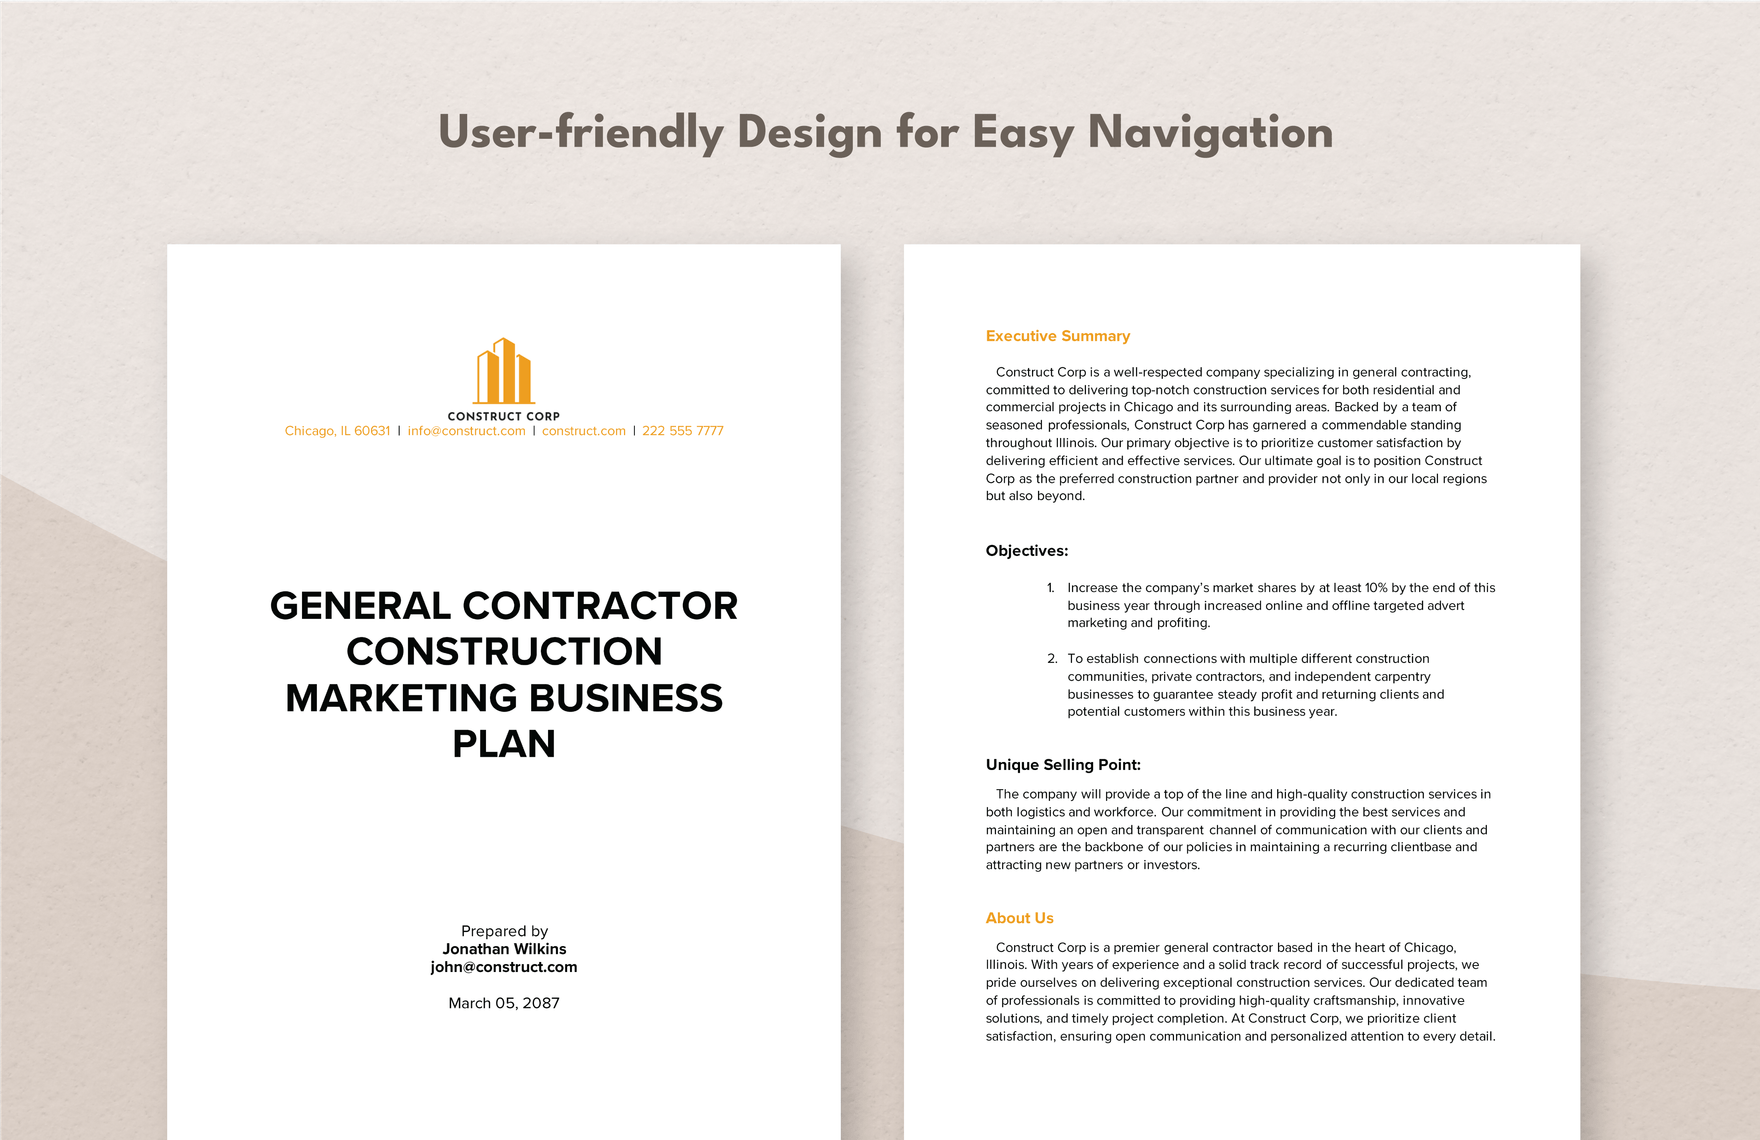 General Contractor Construction Marketing Business Plan Template